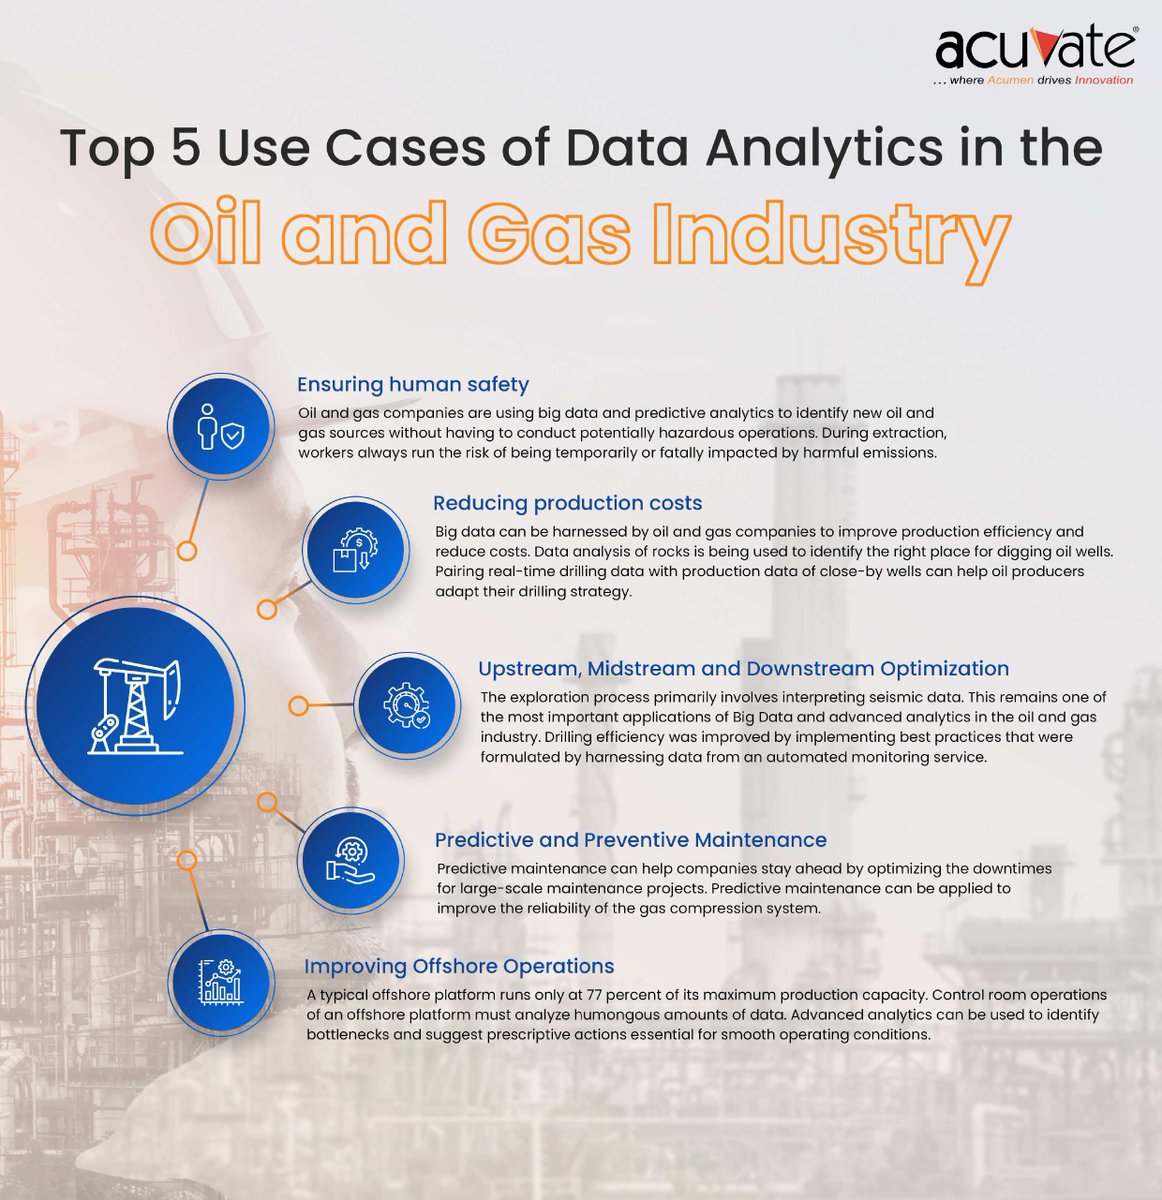 Data analytics has proven useful in various facets of Oil & Gas industry - in optimizing processes, enabling workforce safety, lowering costs, and more. Here are the top 5 Data Analytics #usecases for O&G. hubs.li/Q02tY6Rb0 #dataanalytics #oilandgas #workforce #acuvate